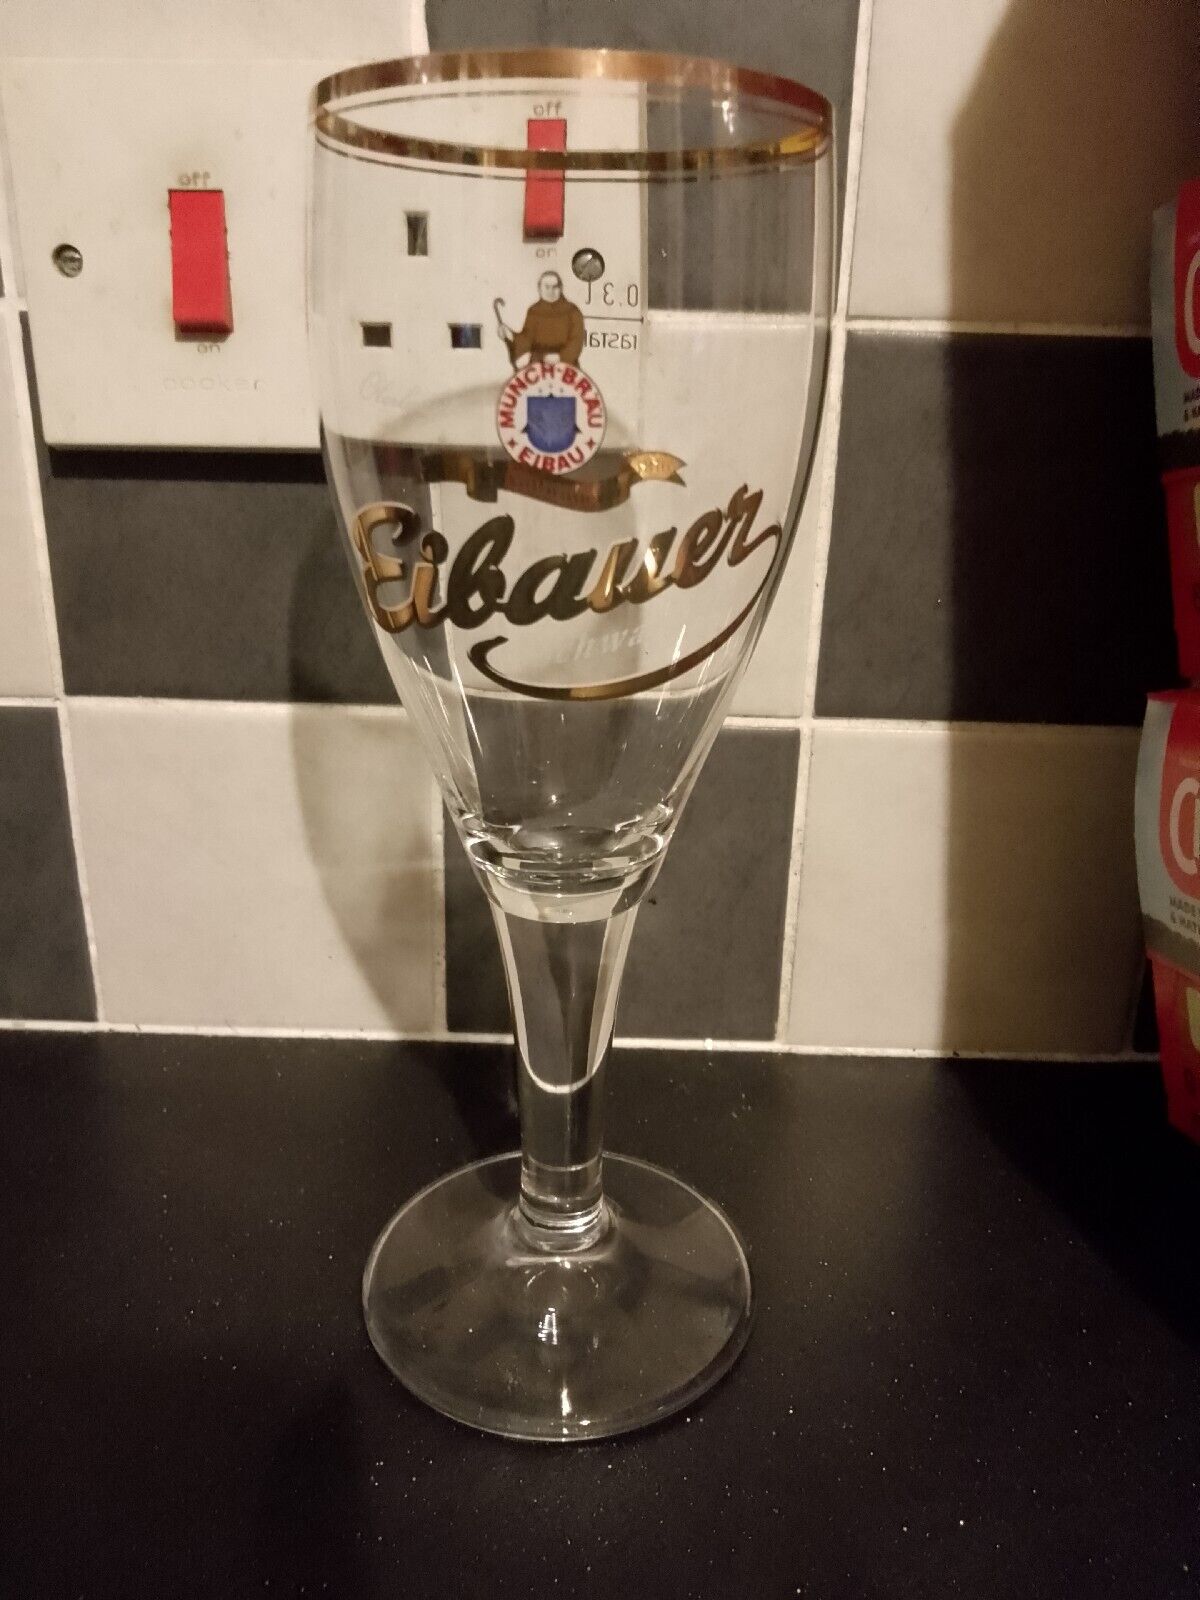 Eibauer Brewery Pint Tulip Beer Glass - Saxony, Germany